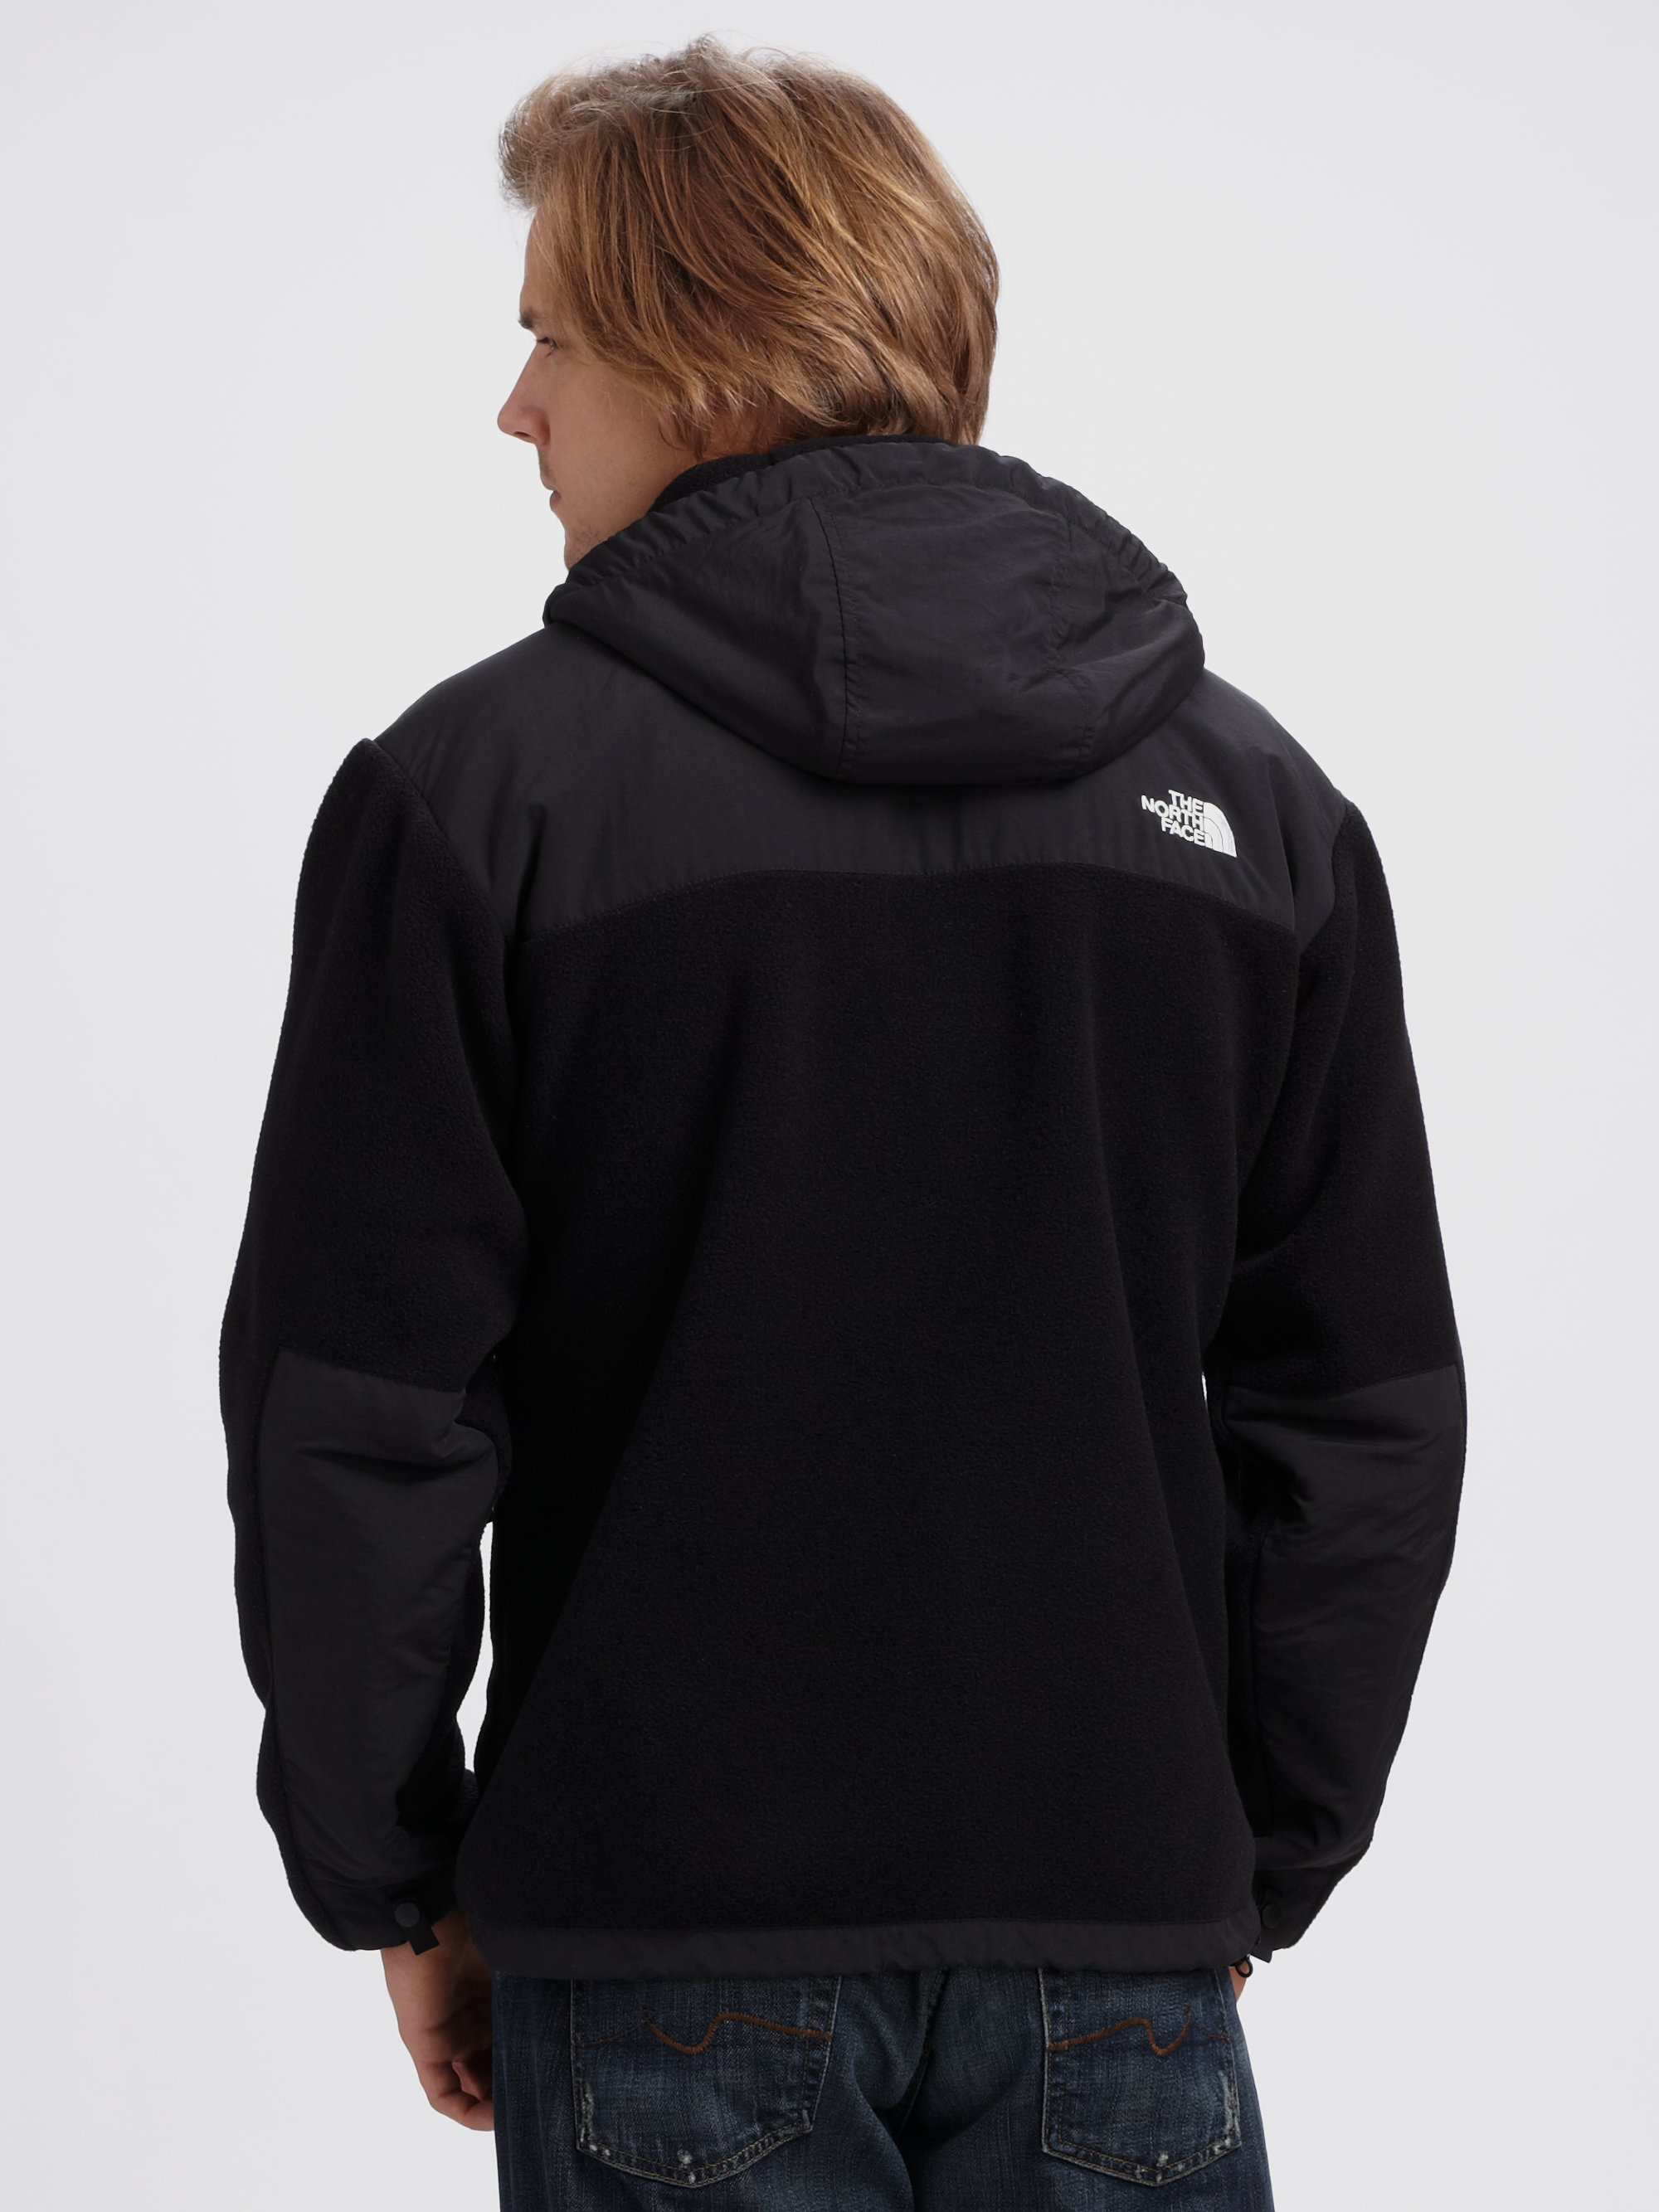 The North Face Hooded Fleece Jacket in Black for Men - Lyst